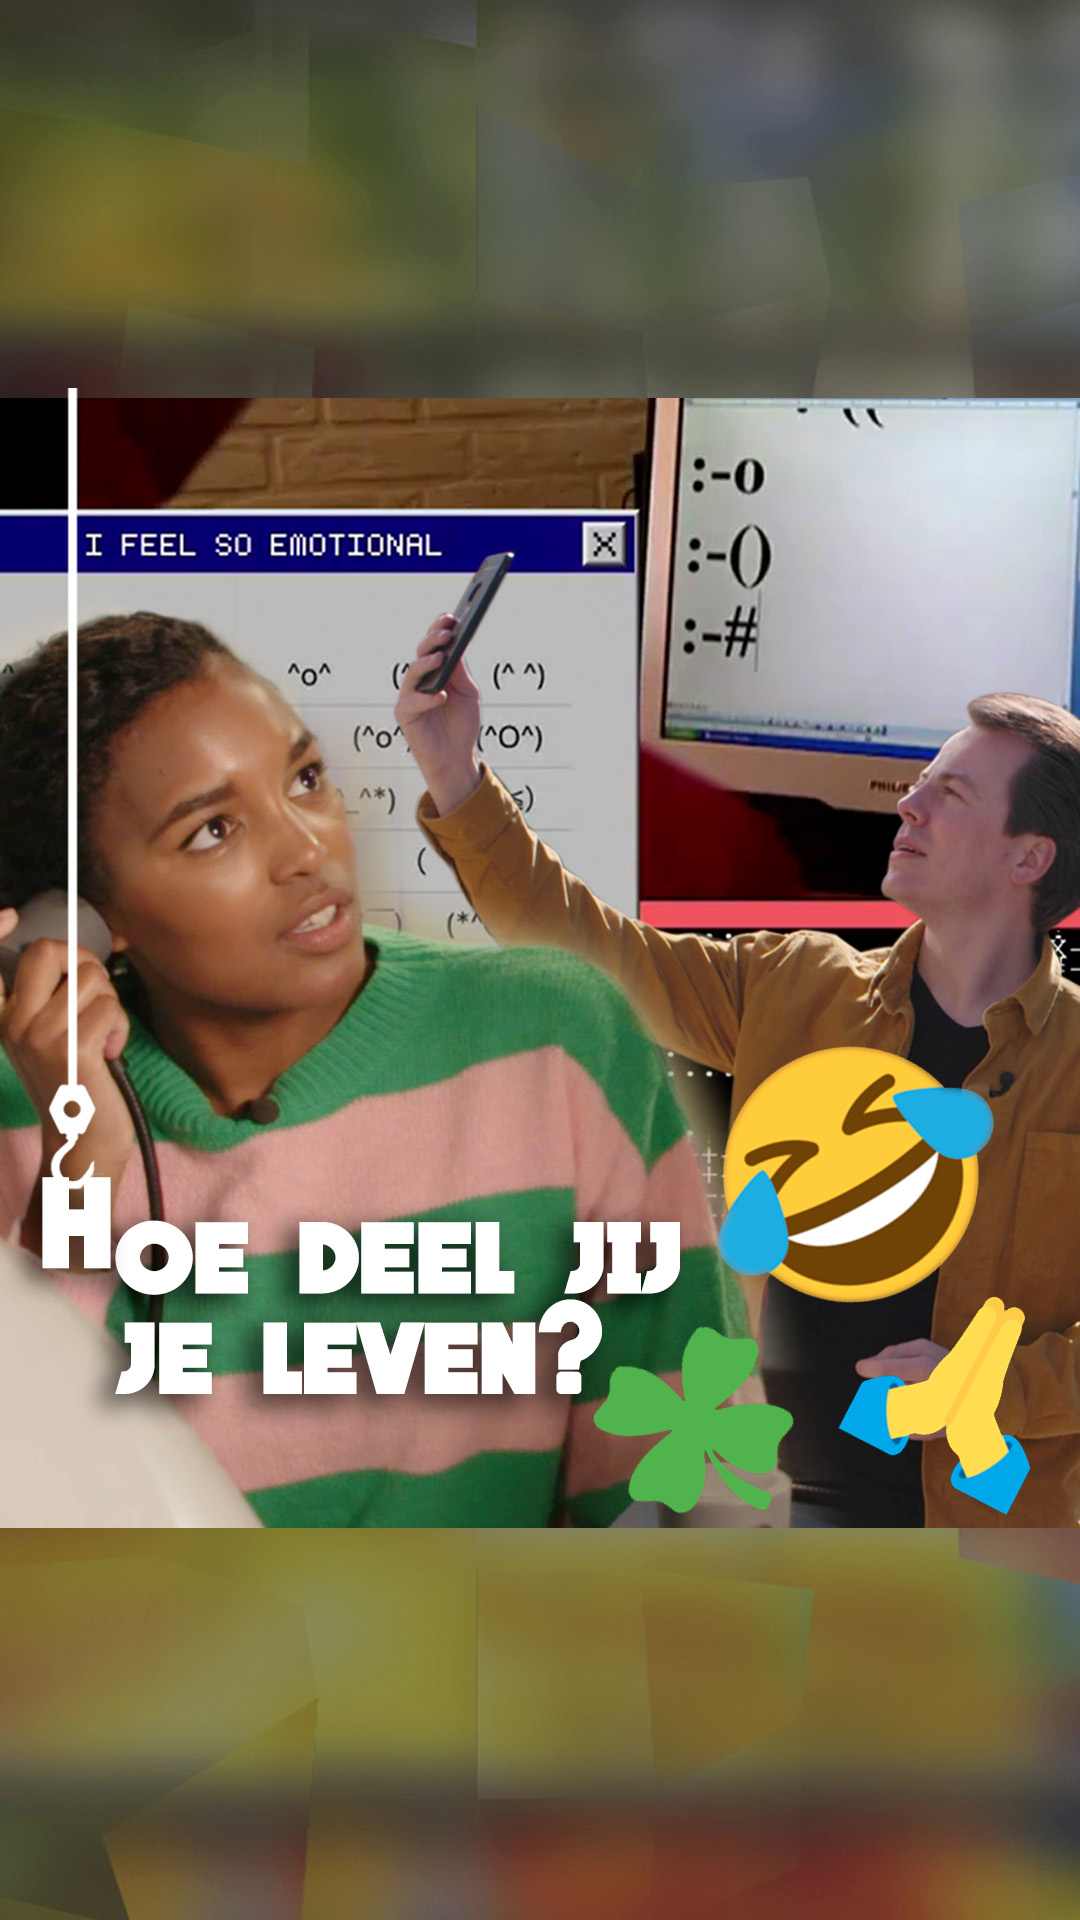 thumbnail of episode 2x04 with host Sosha listening to something through a device, host Kevin's taking a selfie, emoticons from a clover, LOL and a high five while in the background you see computer windows (like from the '90s) and in it characters that make up an emoticon like a colon and a parenthesis close